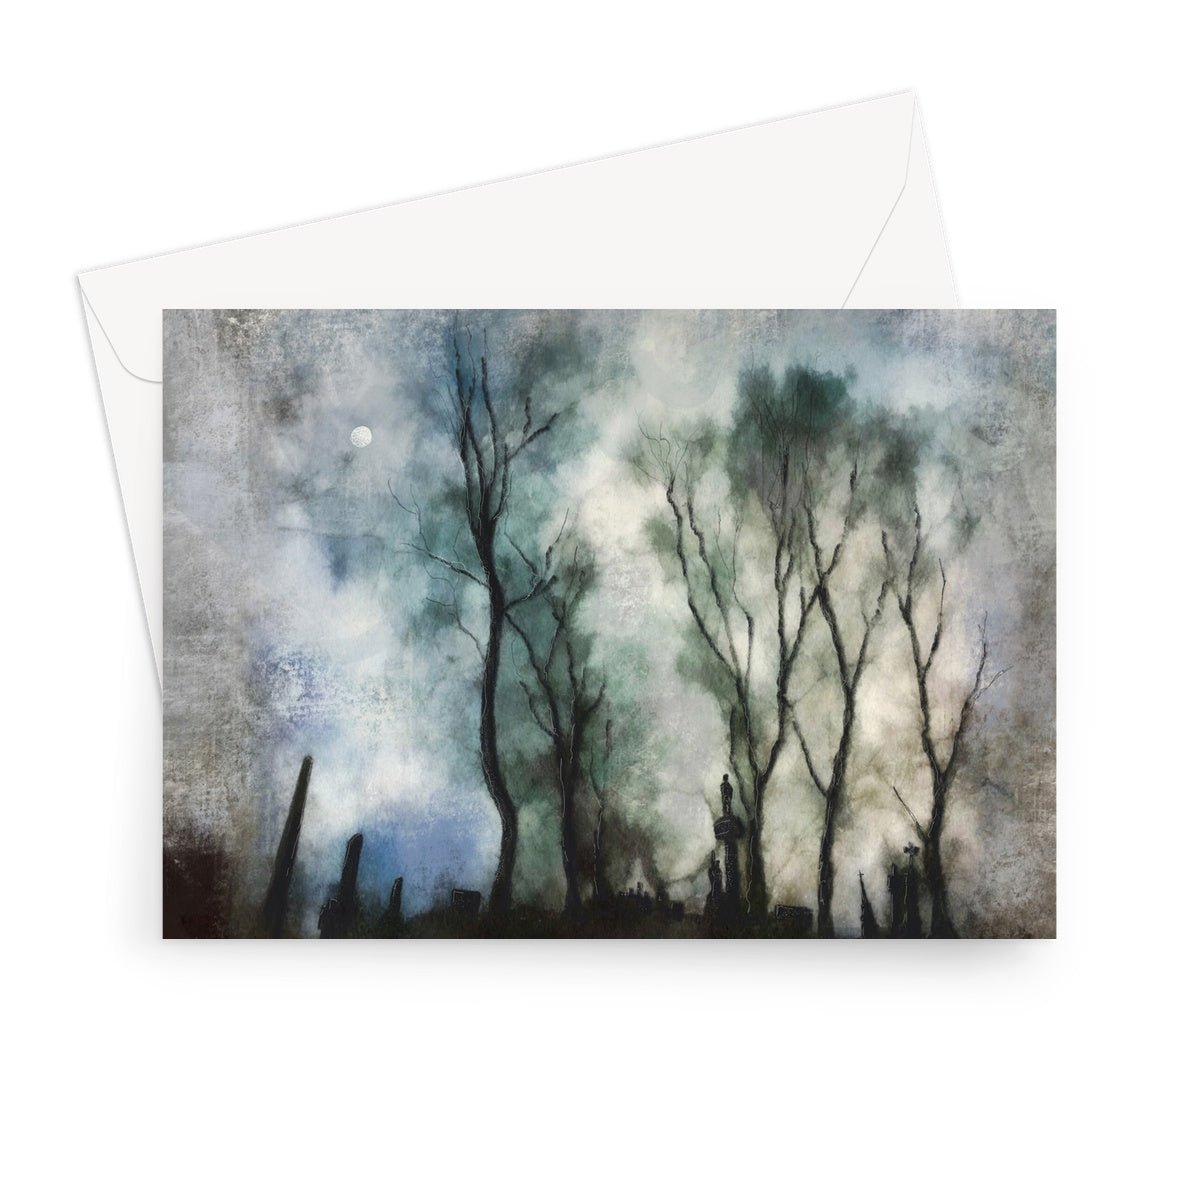 Glasgow Necropolis Moonlight Art Gifts Greeting Card-Greetings Cards-Edinburgh & Glasgow Art Gallery-7"x5"-1 Card-Paintings, Prints, Homeware, Art Gifts From Scotland By Scottish Artist Kevin Hunter